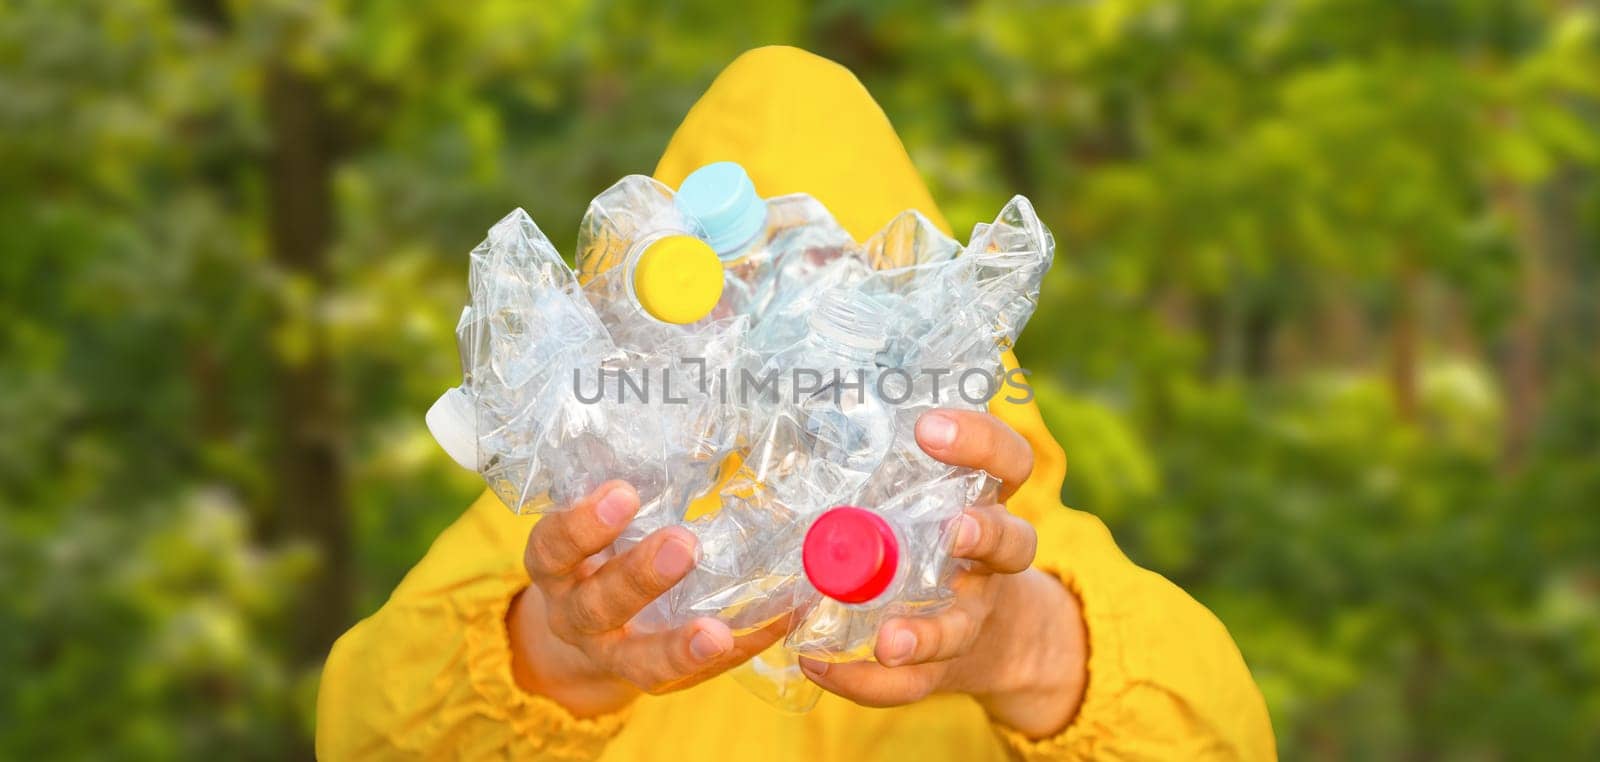 Environment clean up park cleaning trash nature. Volunteer hands holding bottle plastic garbage. Volunteer cleaning forest. PET waste plastic hand trash pick up garbage nature. PET plastic pollution